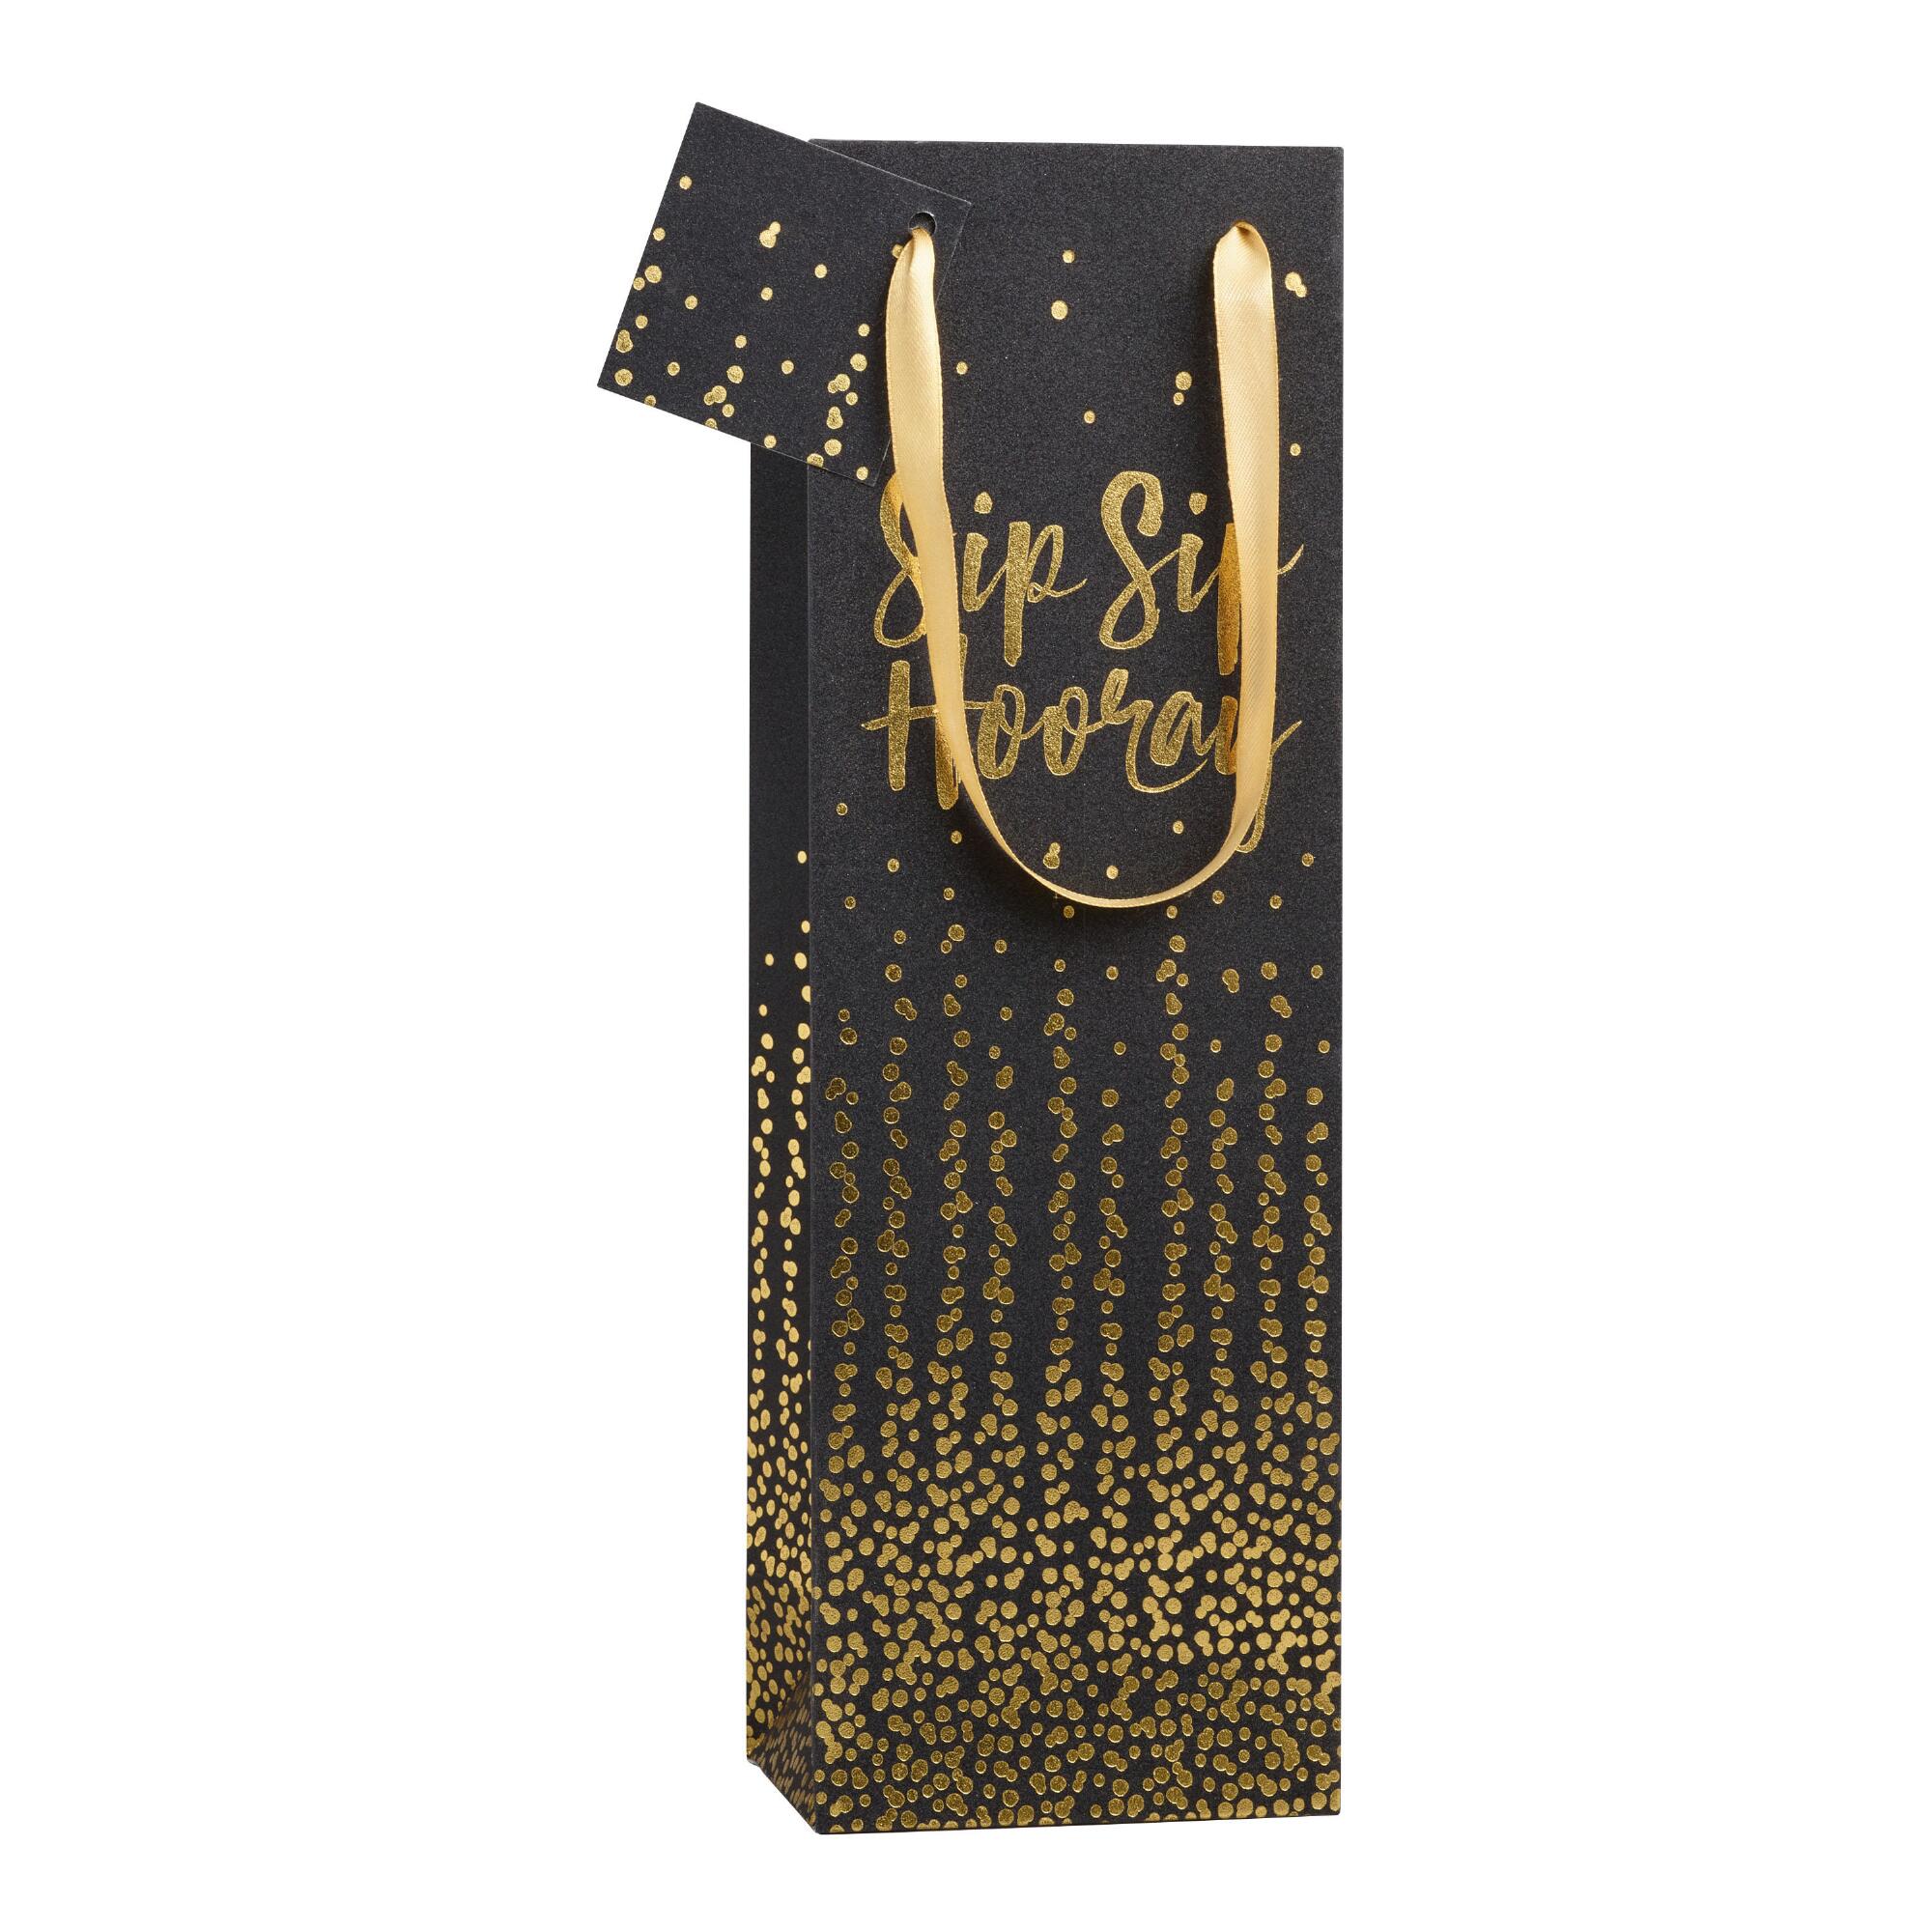 Black and Gold Sip Sip Hooray Wine Bag by World Market